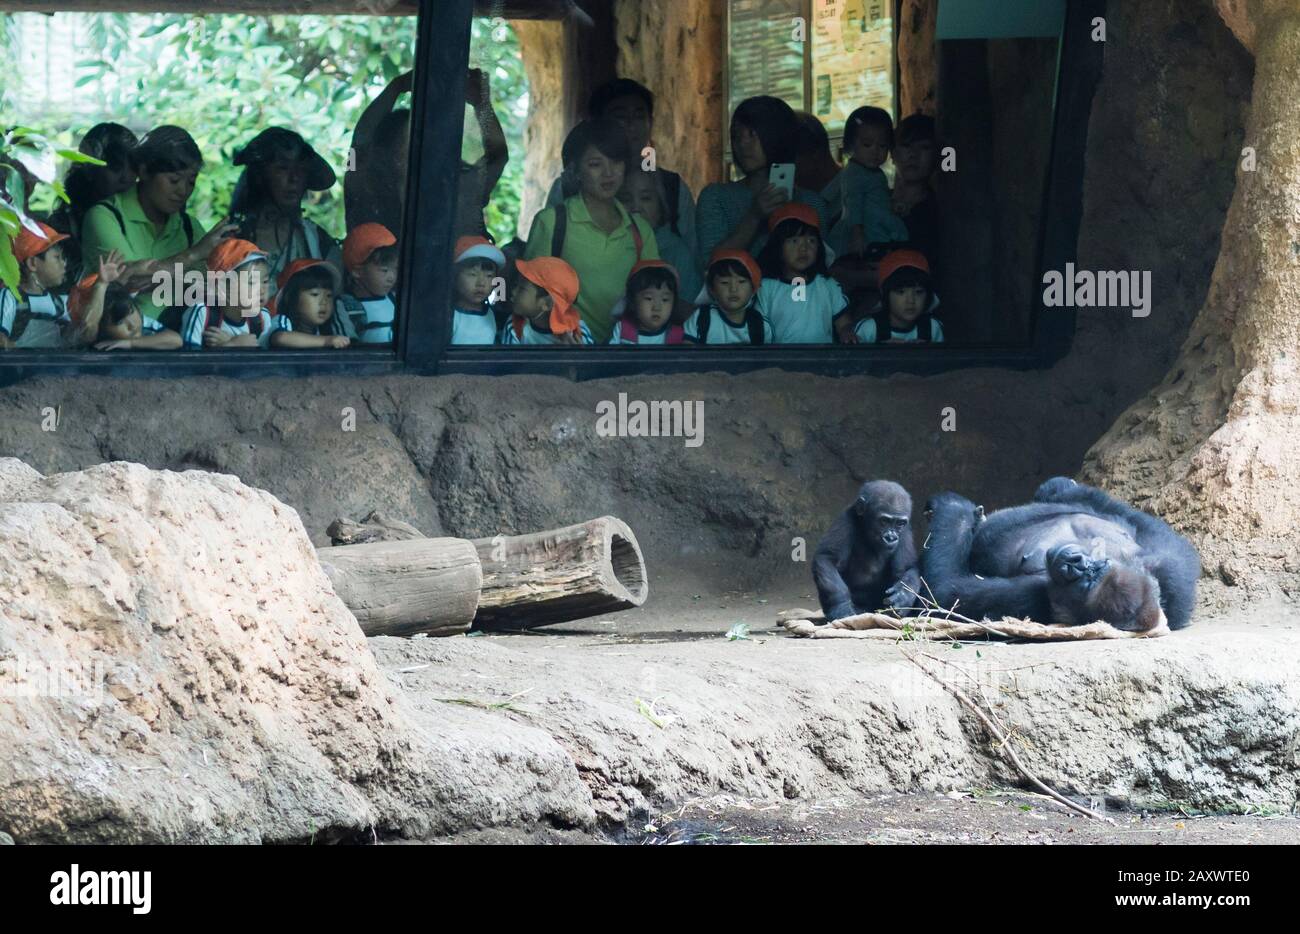 Tokyo, Japan - 11 Oct 2018: While on a field trip at the Tokyo zoo, a group of Japanese school children is watching a chimpanzees in their compound. Stock Photo